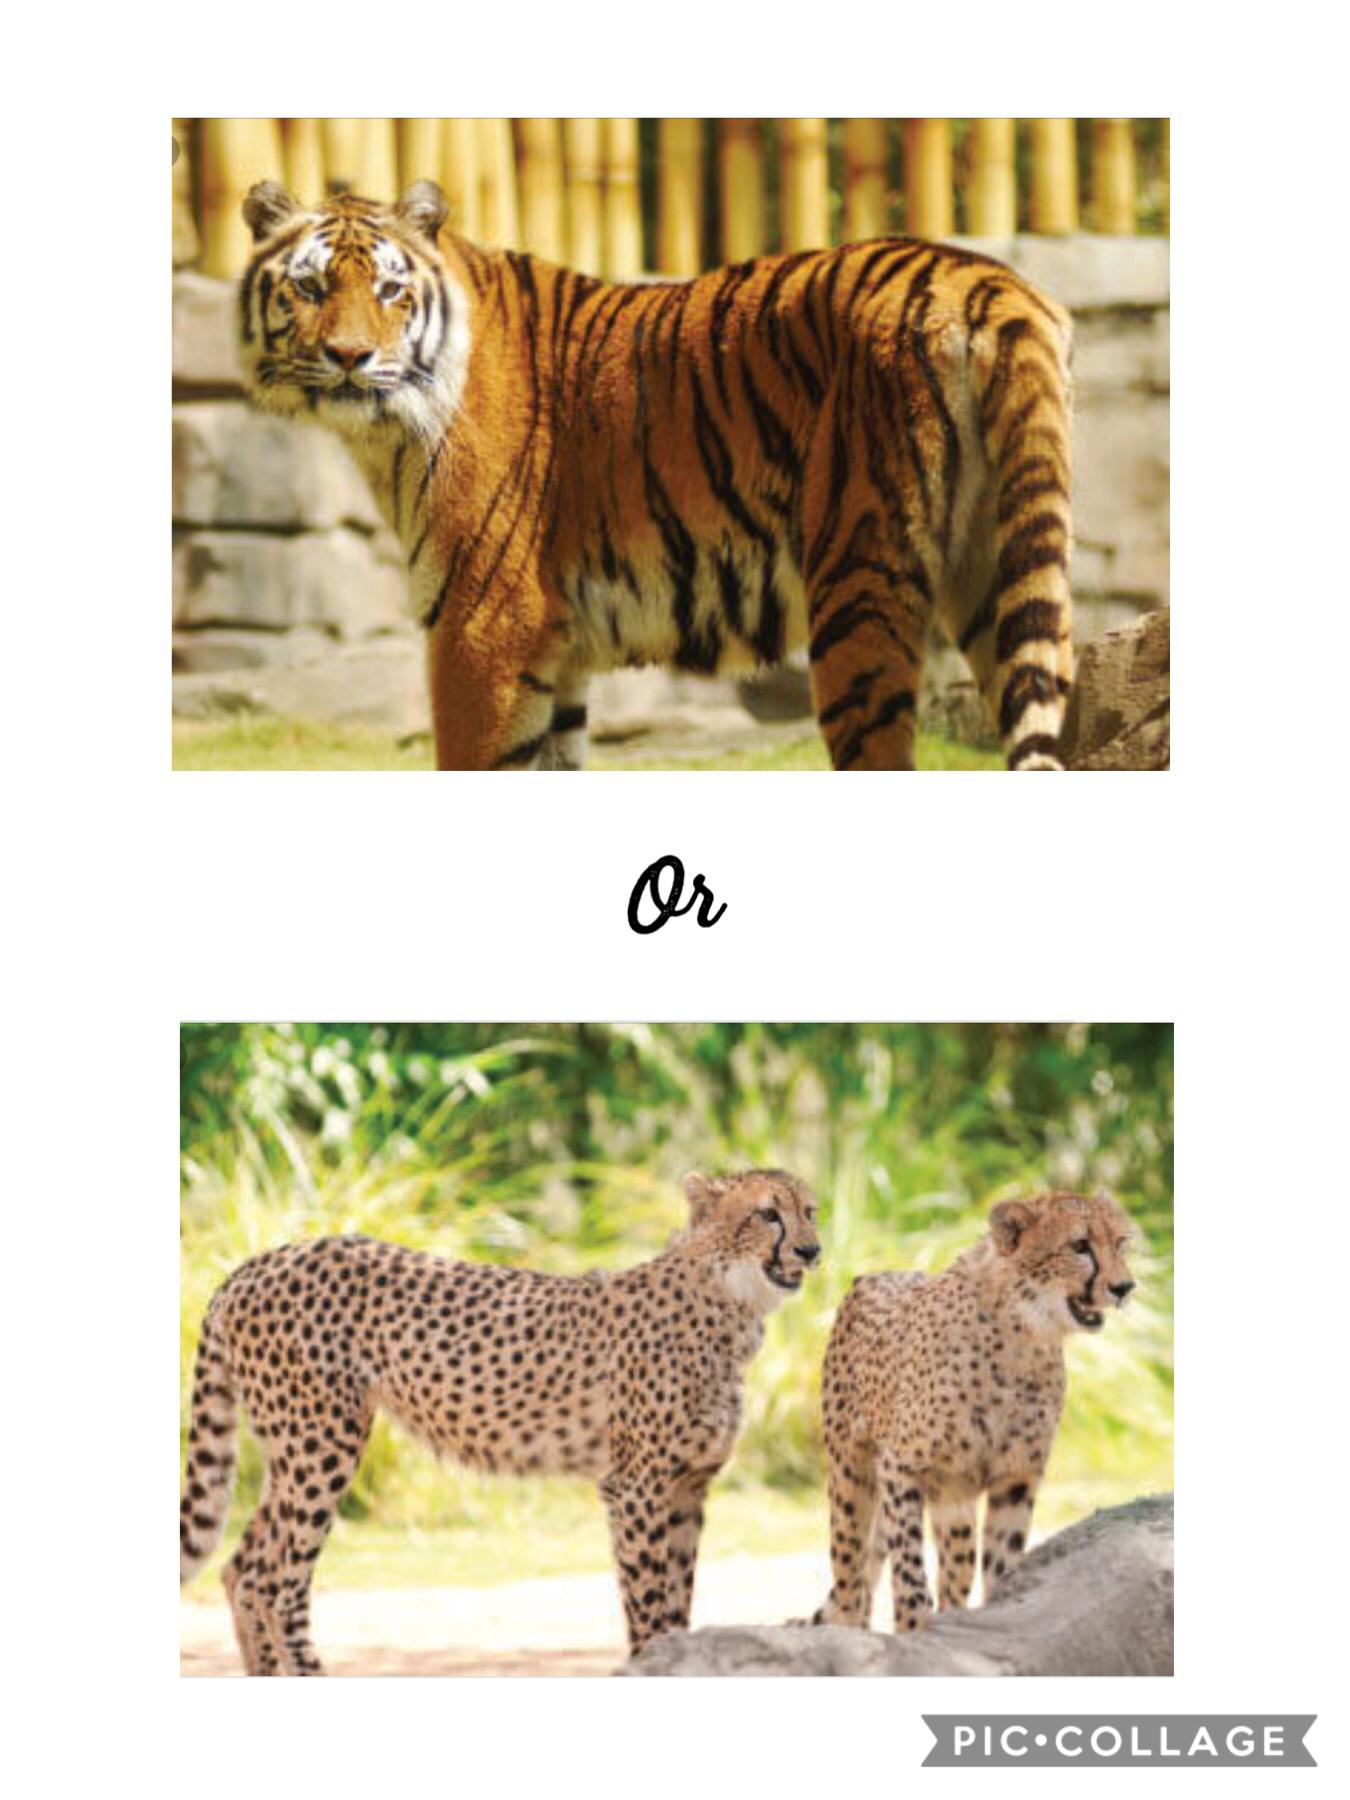 What would u prefer a cheetah or a tiger